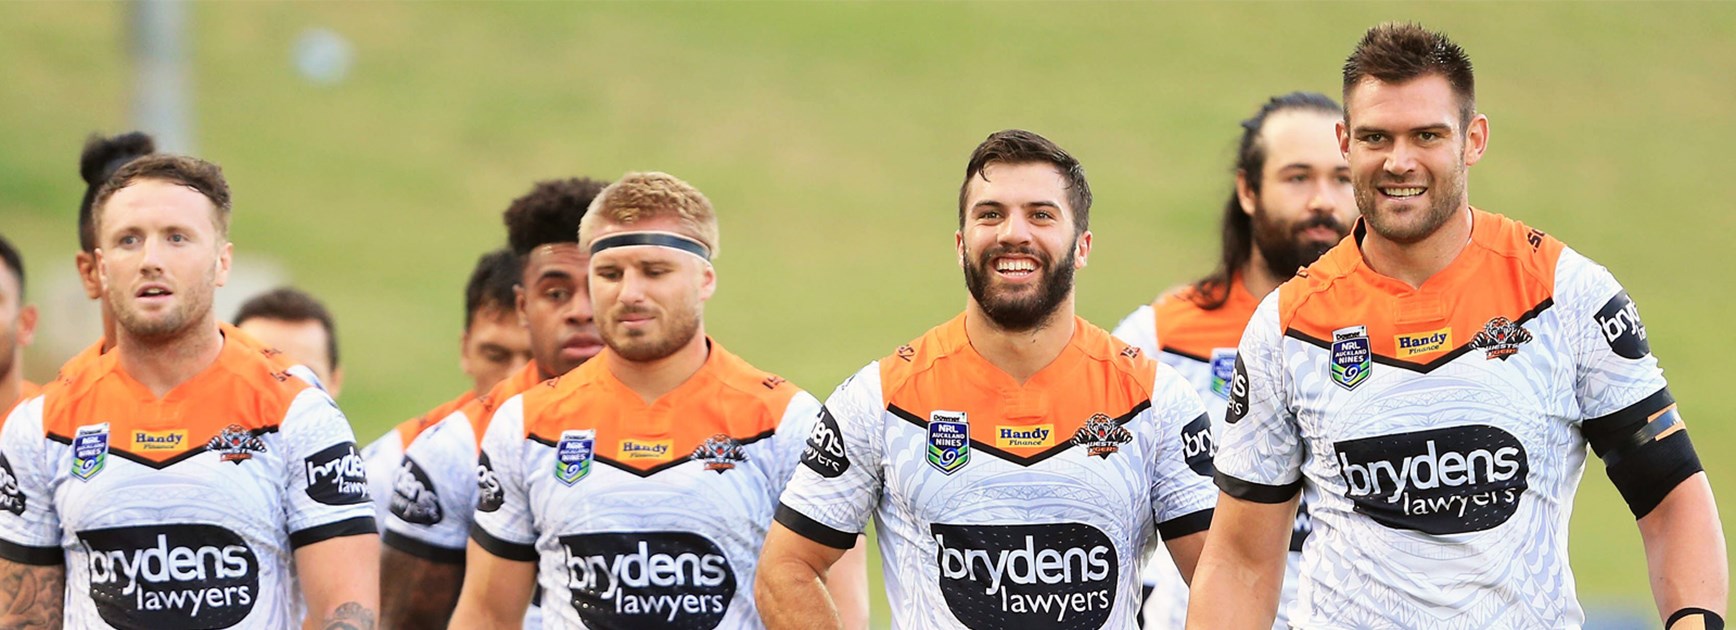 The Wests Tigers during their impressive trial game performance against the Cowboys.